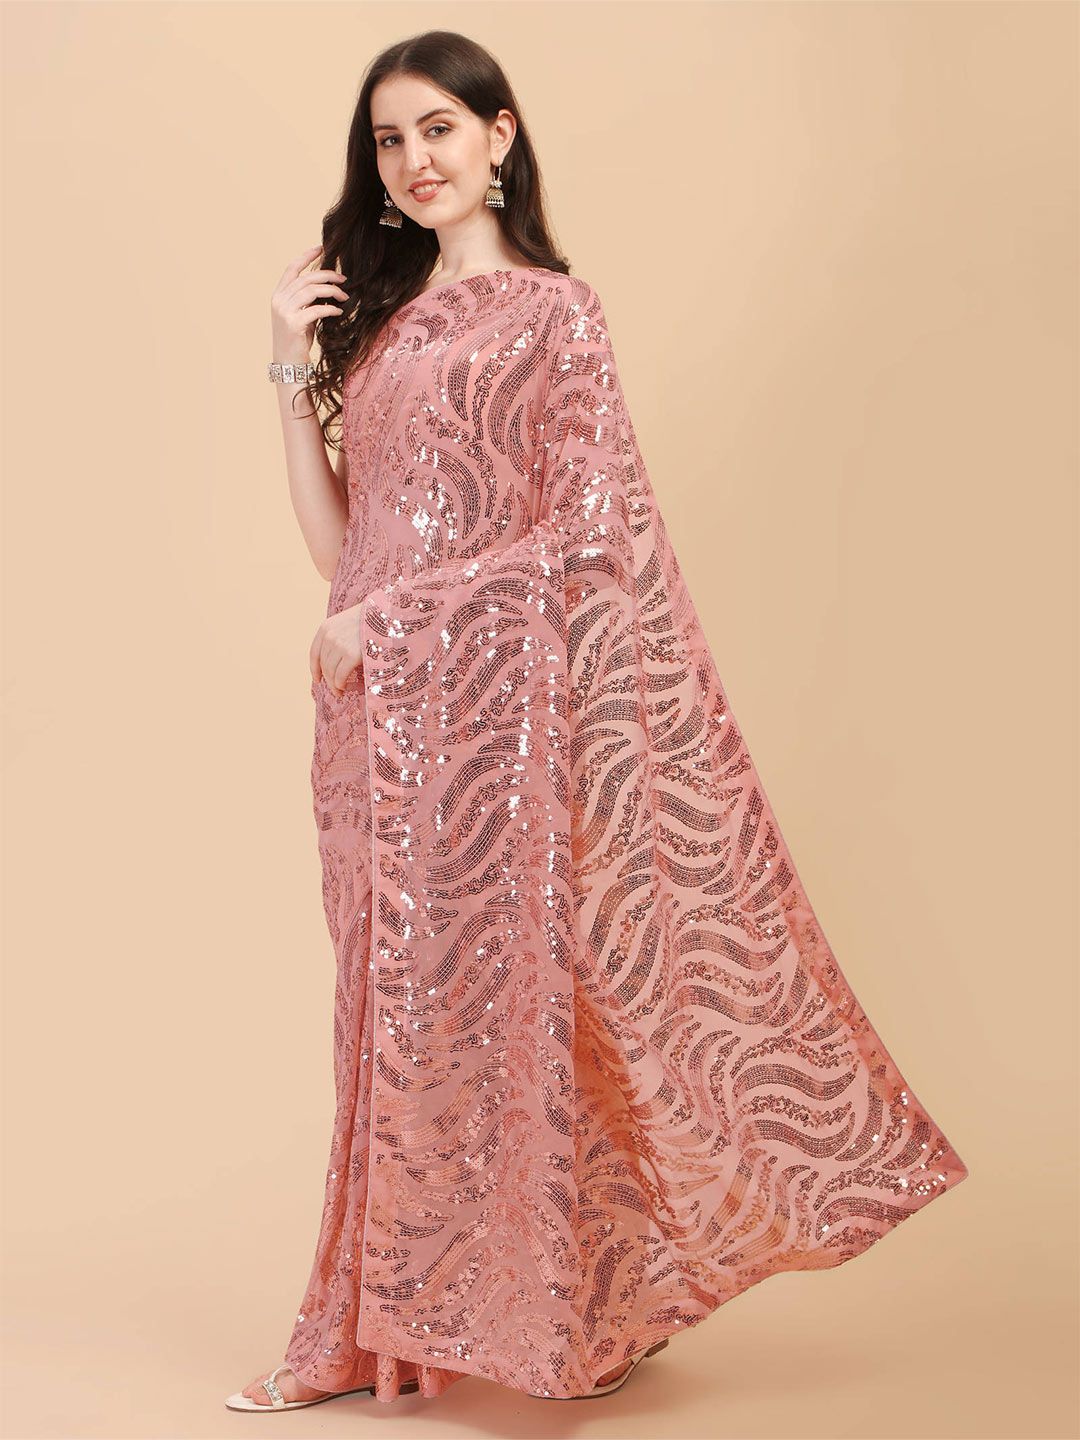 nirja Fab Nude-Coloured & Silver-Toned Embellished Sequinned Saree Price in India